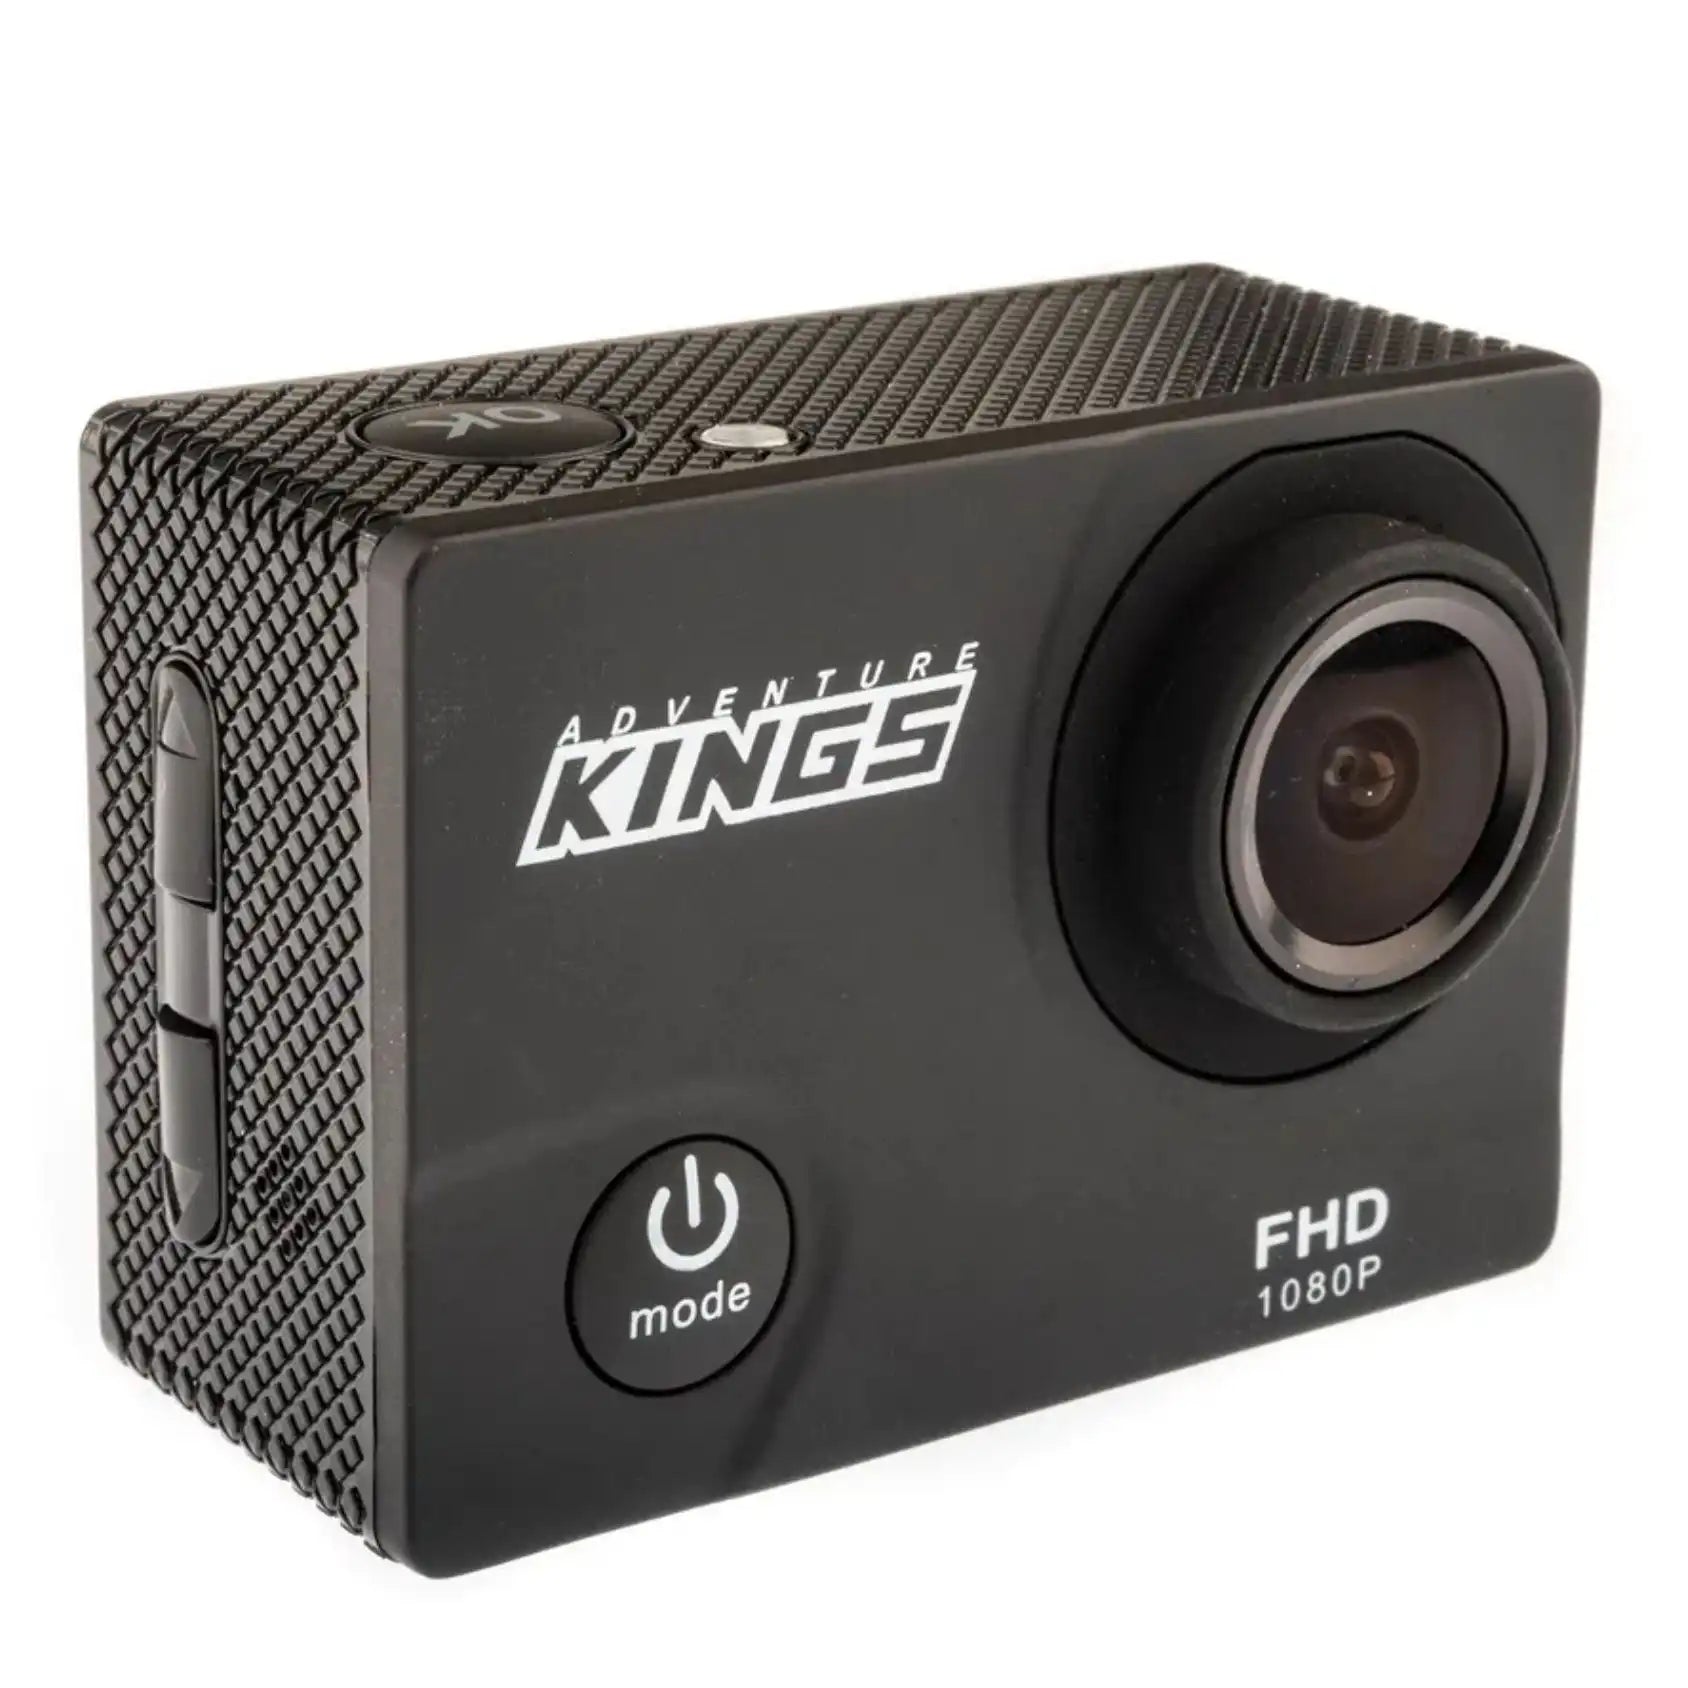 Adventure Kings Action Camera 